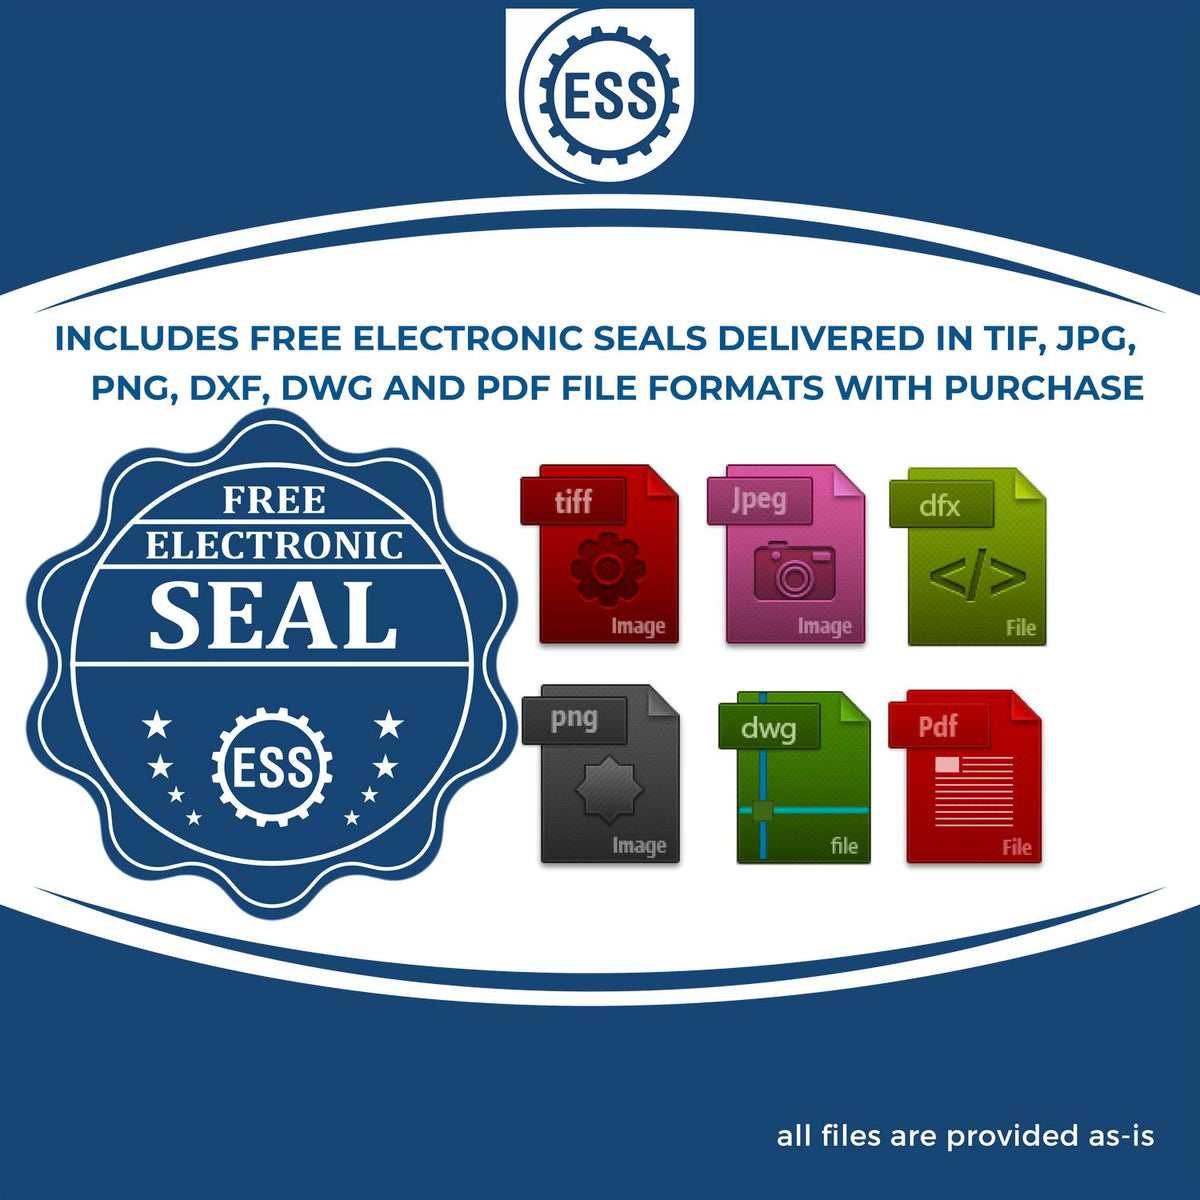 An infographic for the free electronic seal for the Soft Kentucky Professional Geologist Seal illustrating the different file type icons such as DXF, DWG, TIF, JPG and PNG.